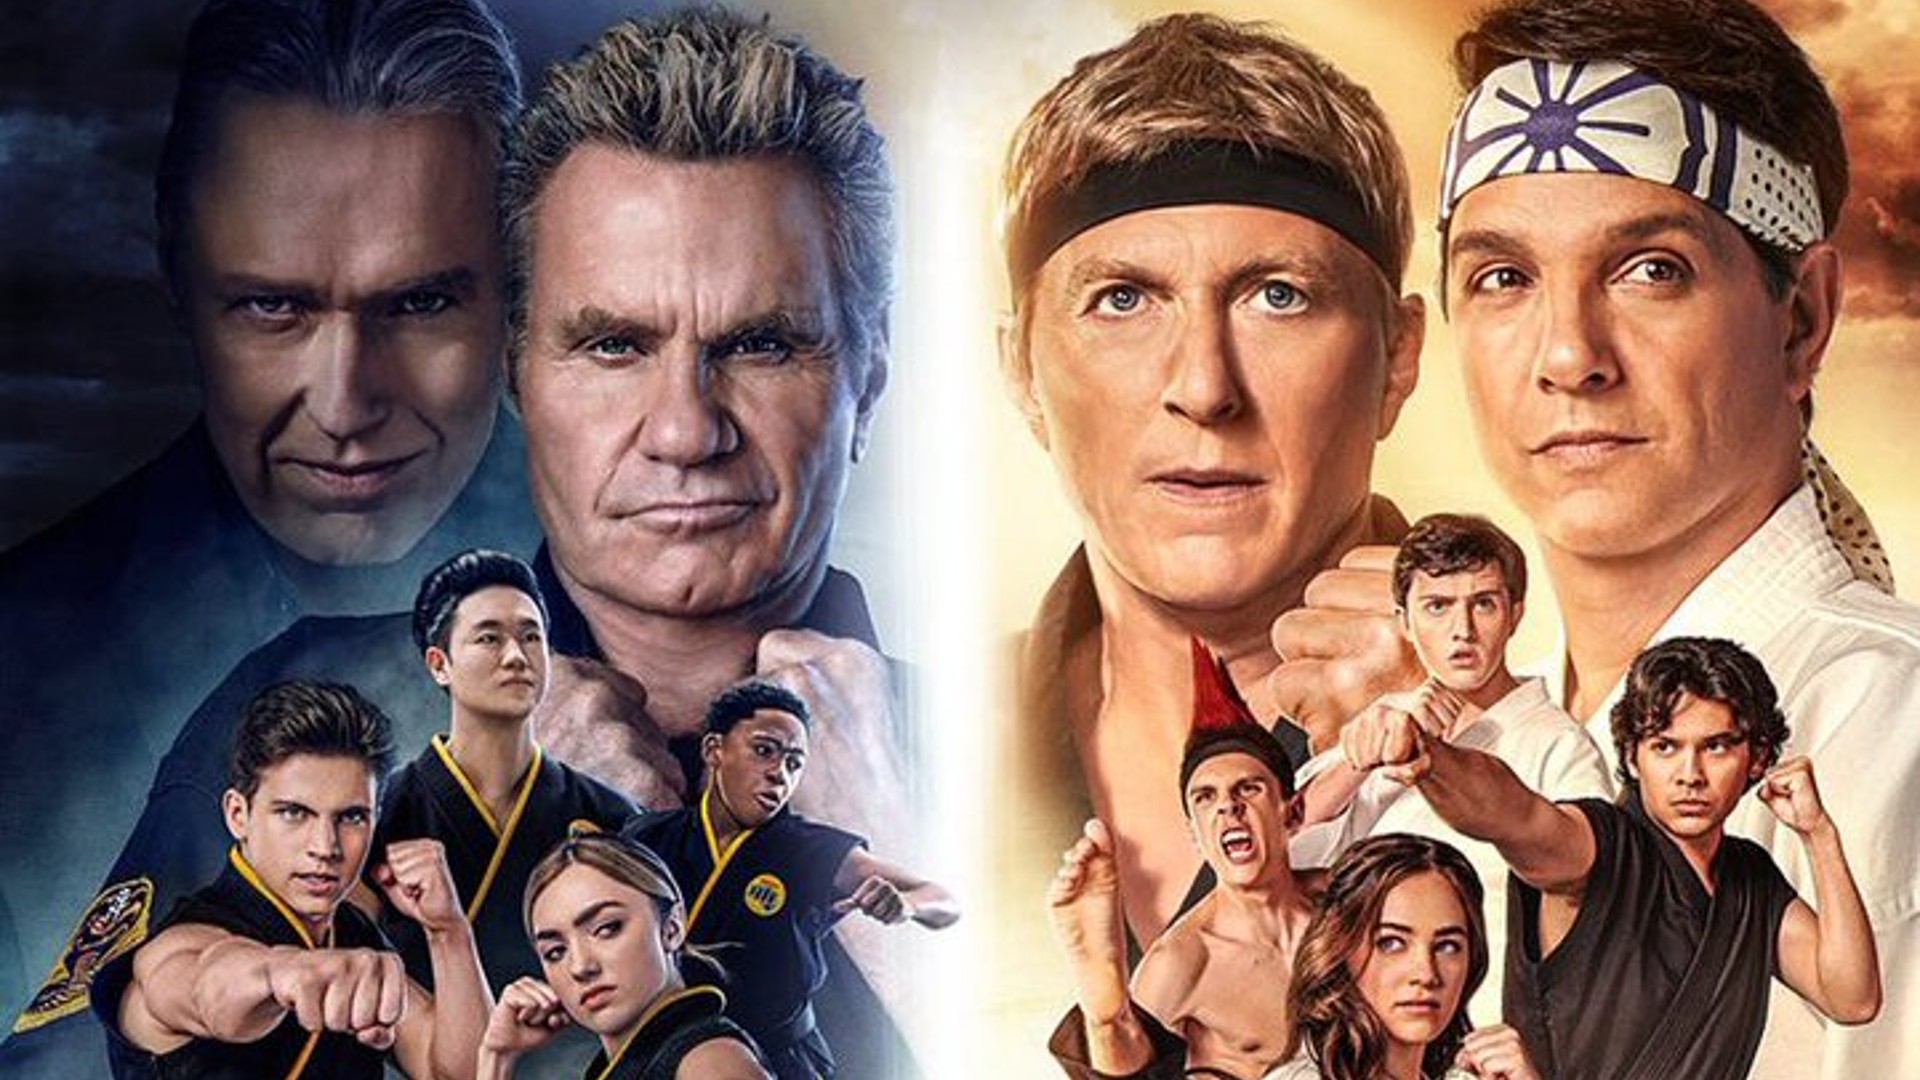 Cobra Kai is the Wendy’s of television: it’s junk fast food, but it’s really good junk fast food that goes down easily and is a nice treat.